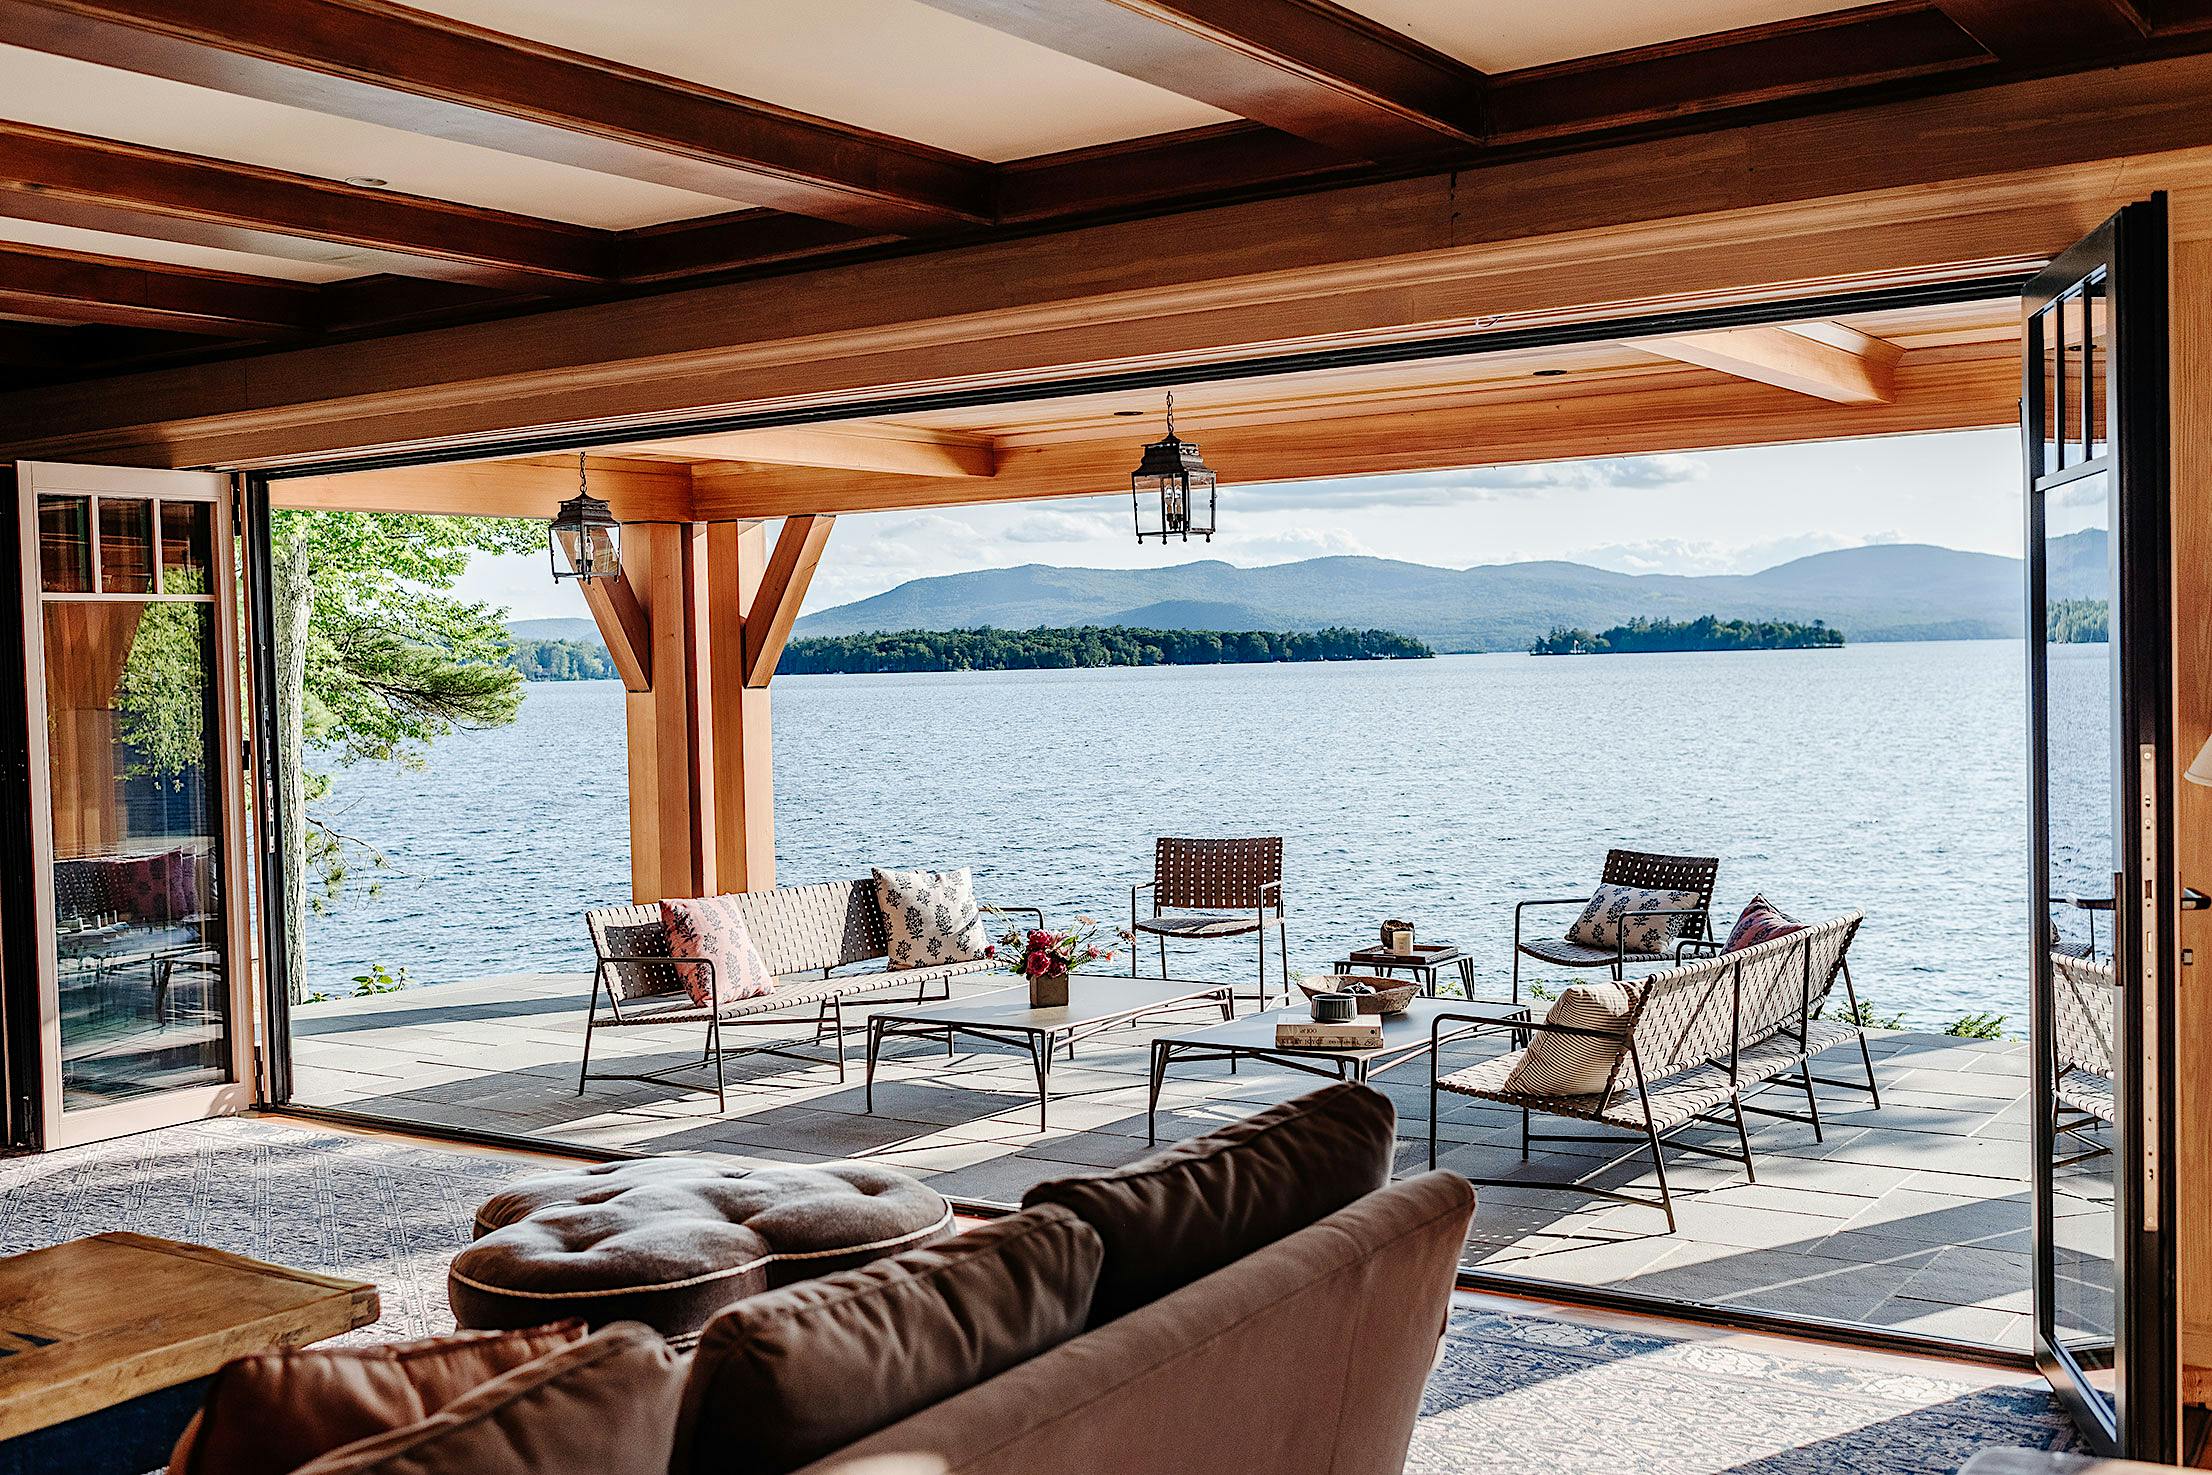 A spacious living room with folding glass walls that offer a stunning view of the serene lake